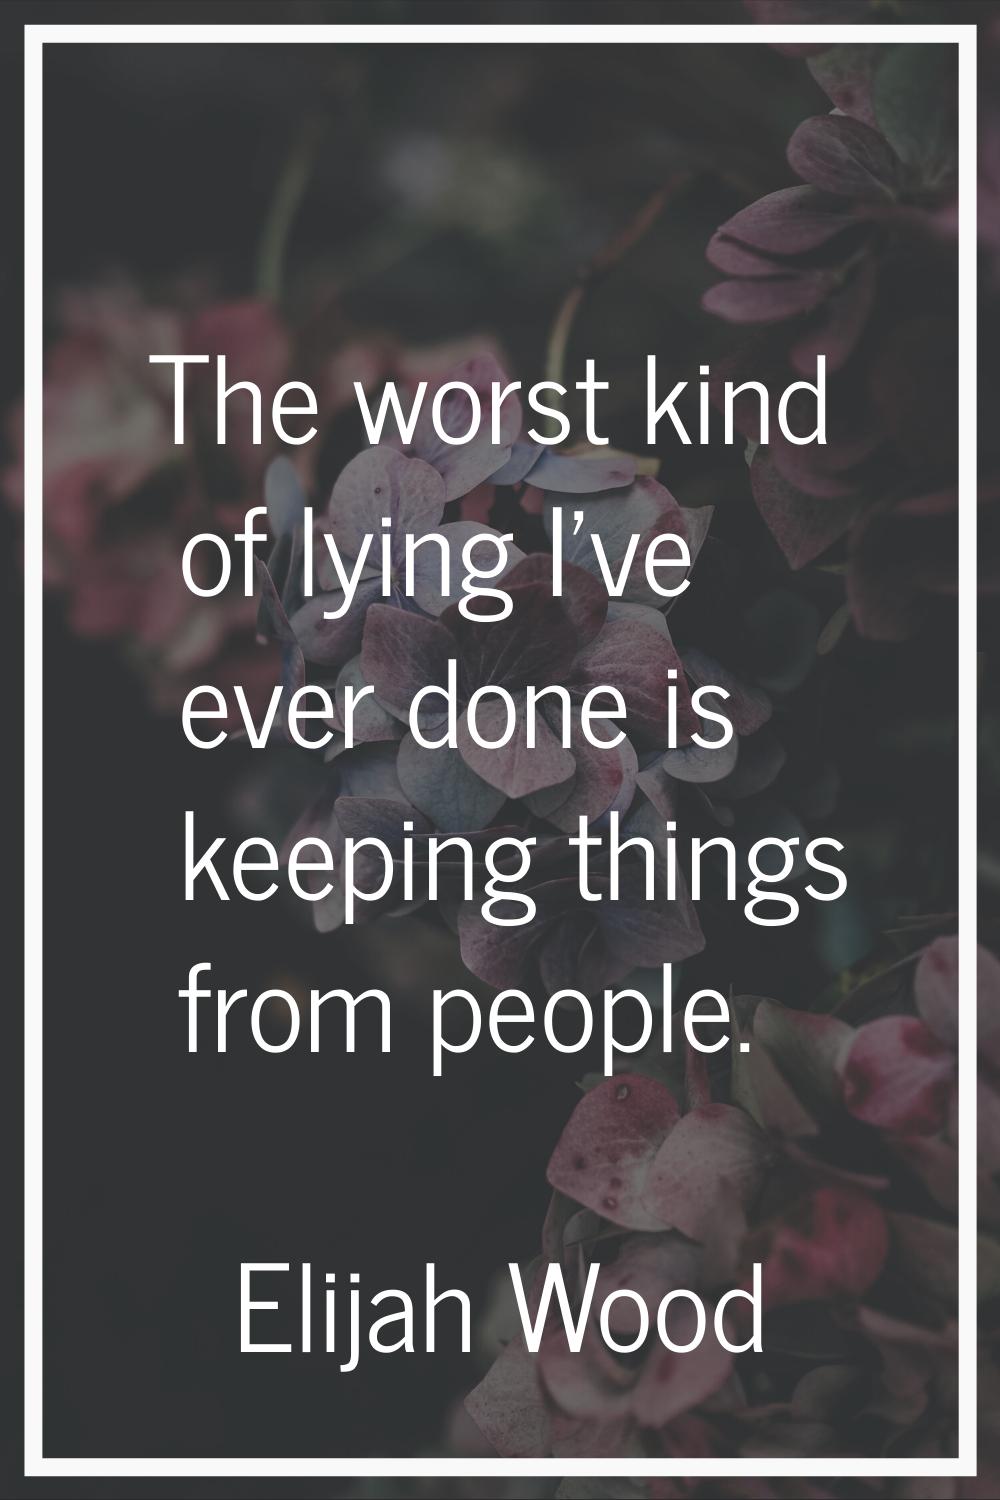 The worst kind of lying I've ever done is keeping things from people.